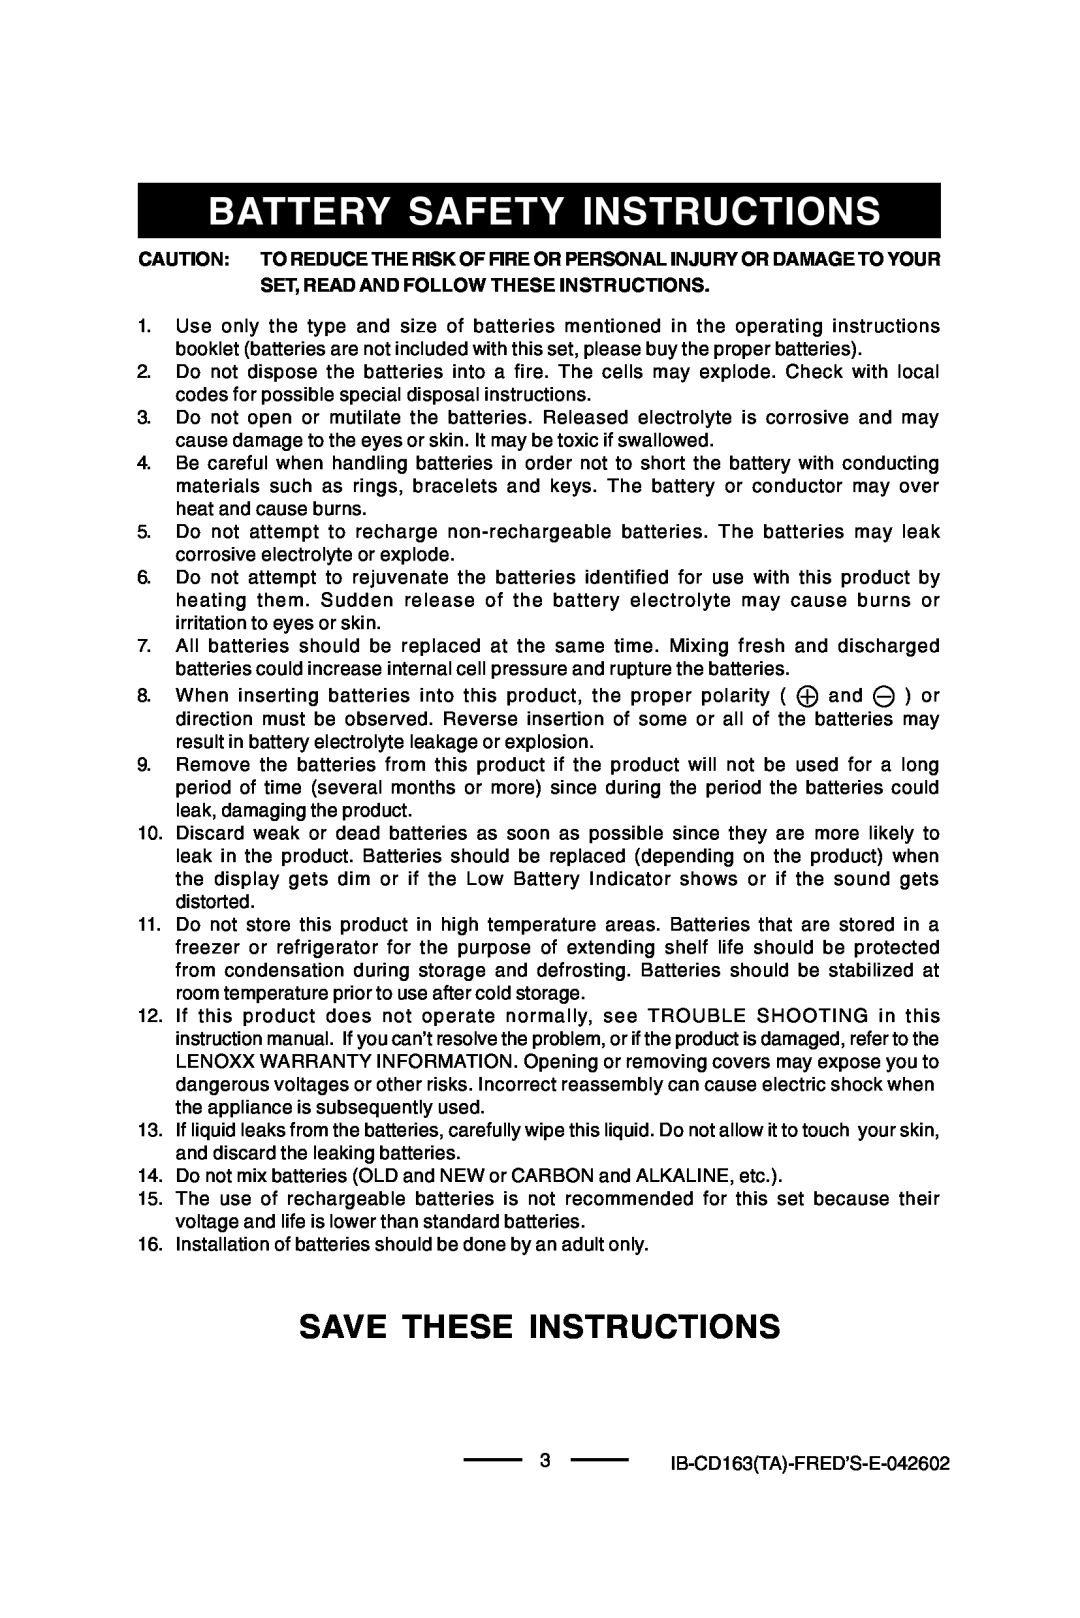 Lenoxx Electronics CD-163 manual Save These Instructions, Battery Safety Instructions 